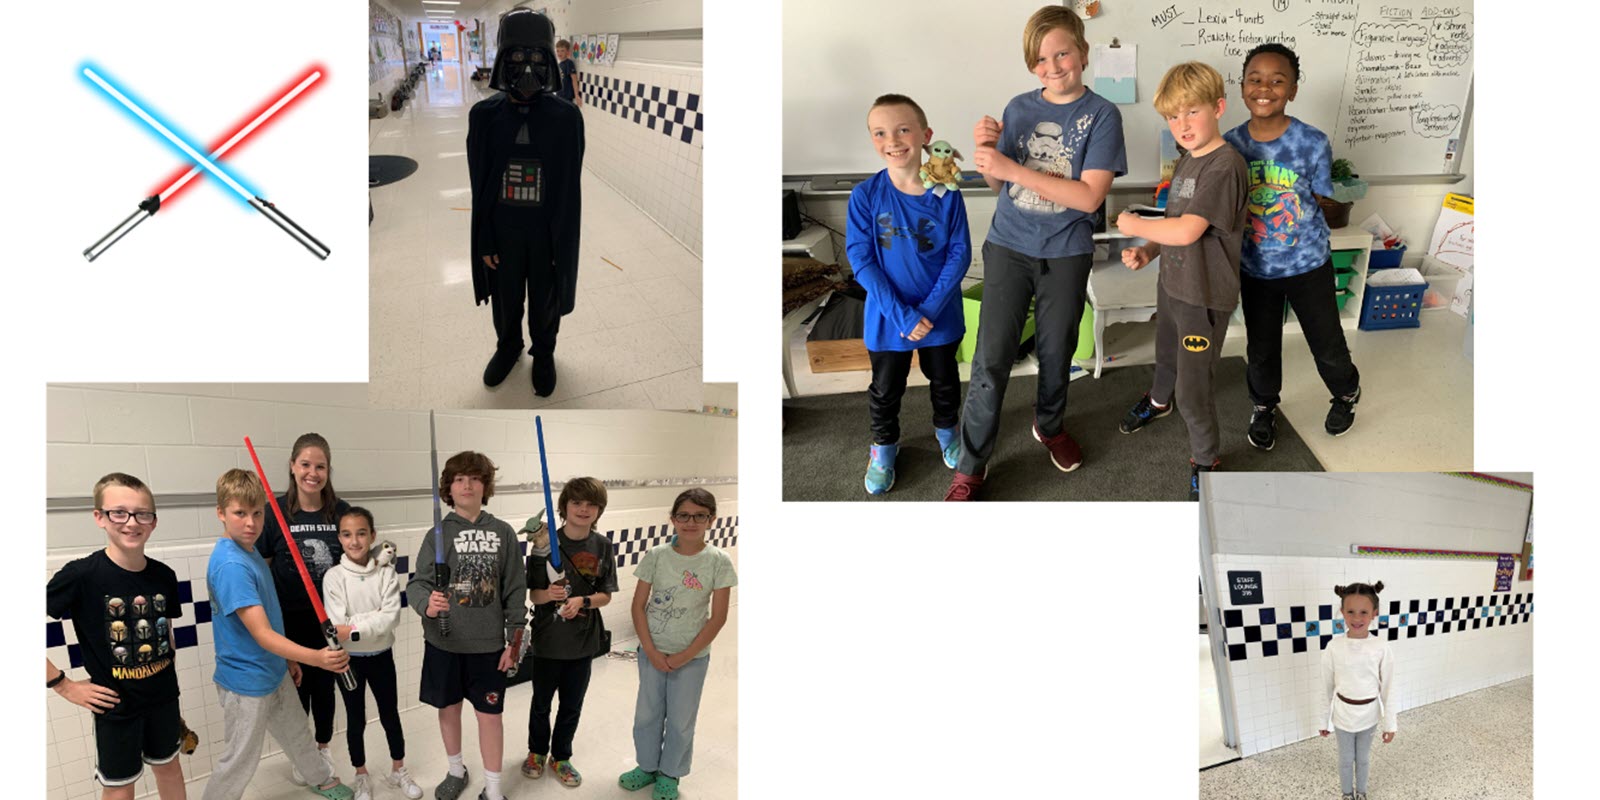 Students and staff in Star Wars shirts